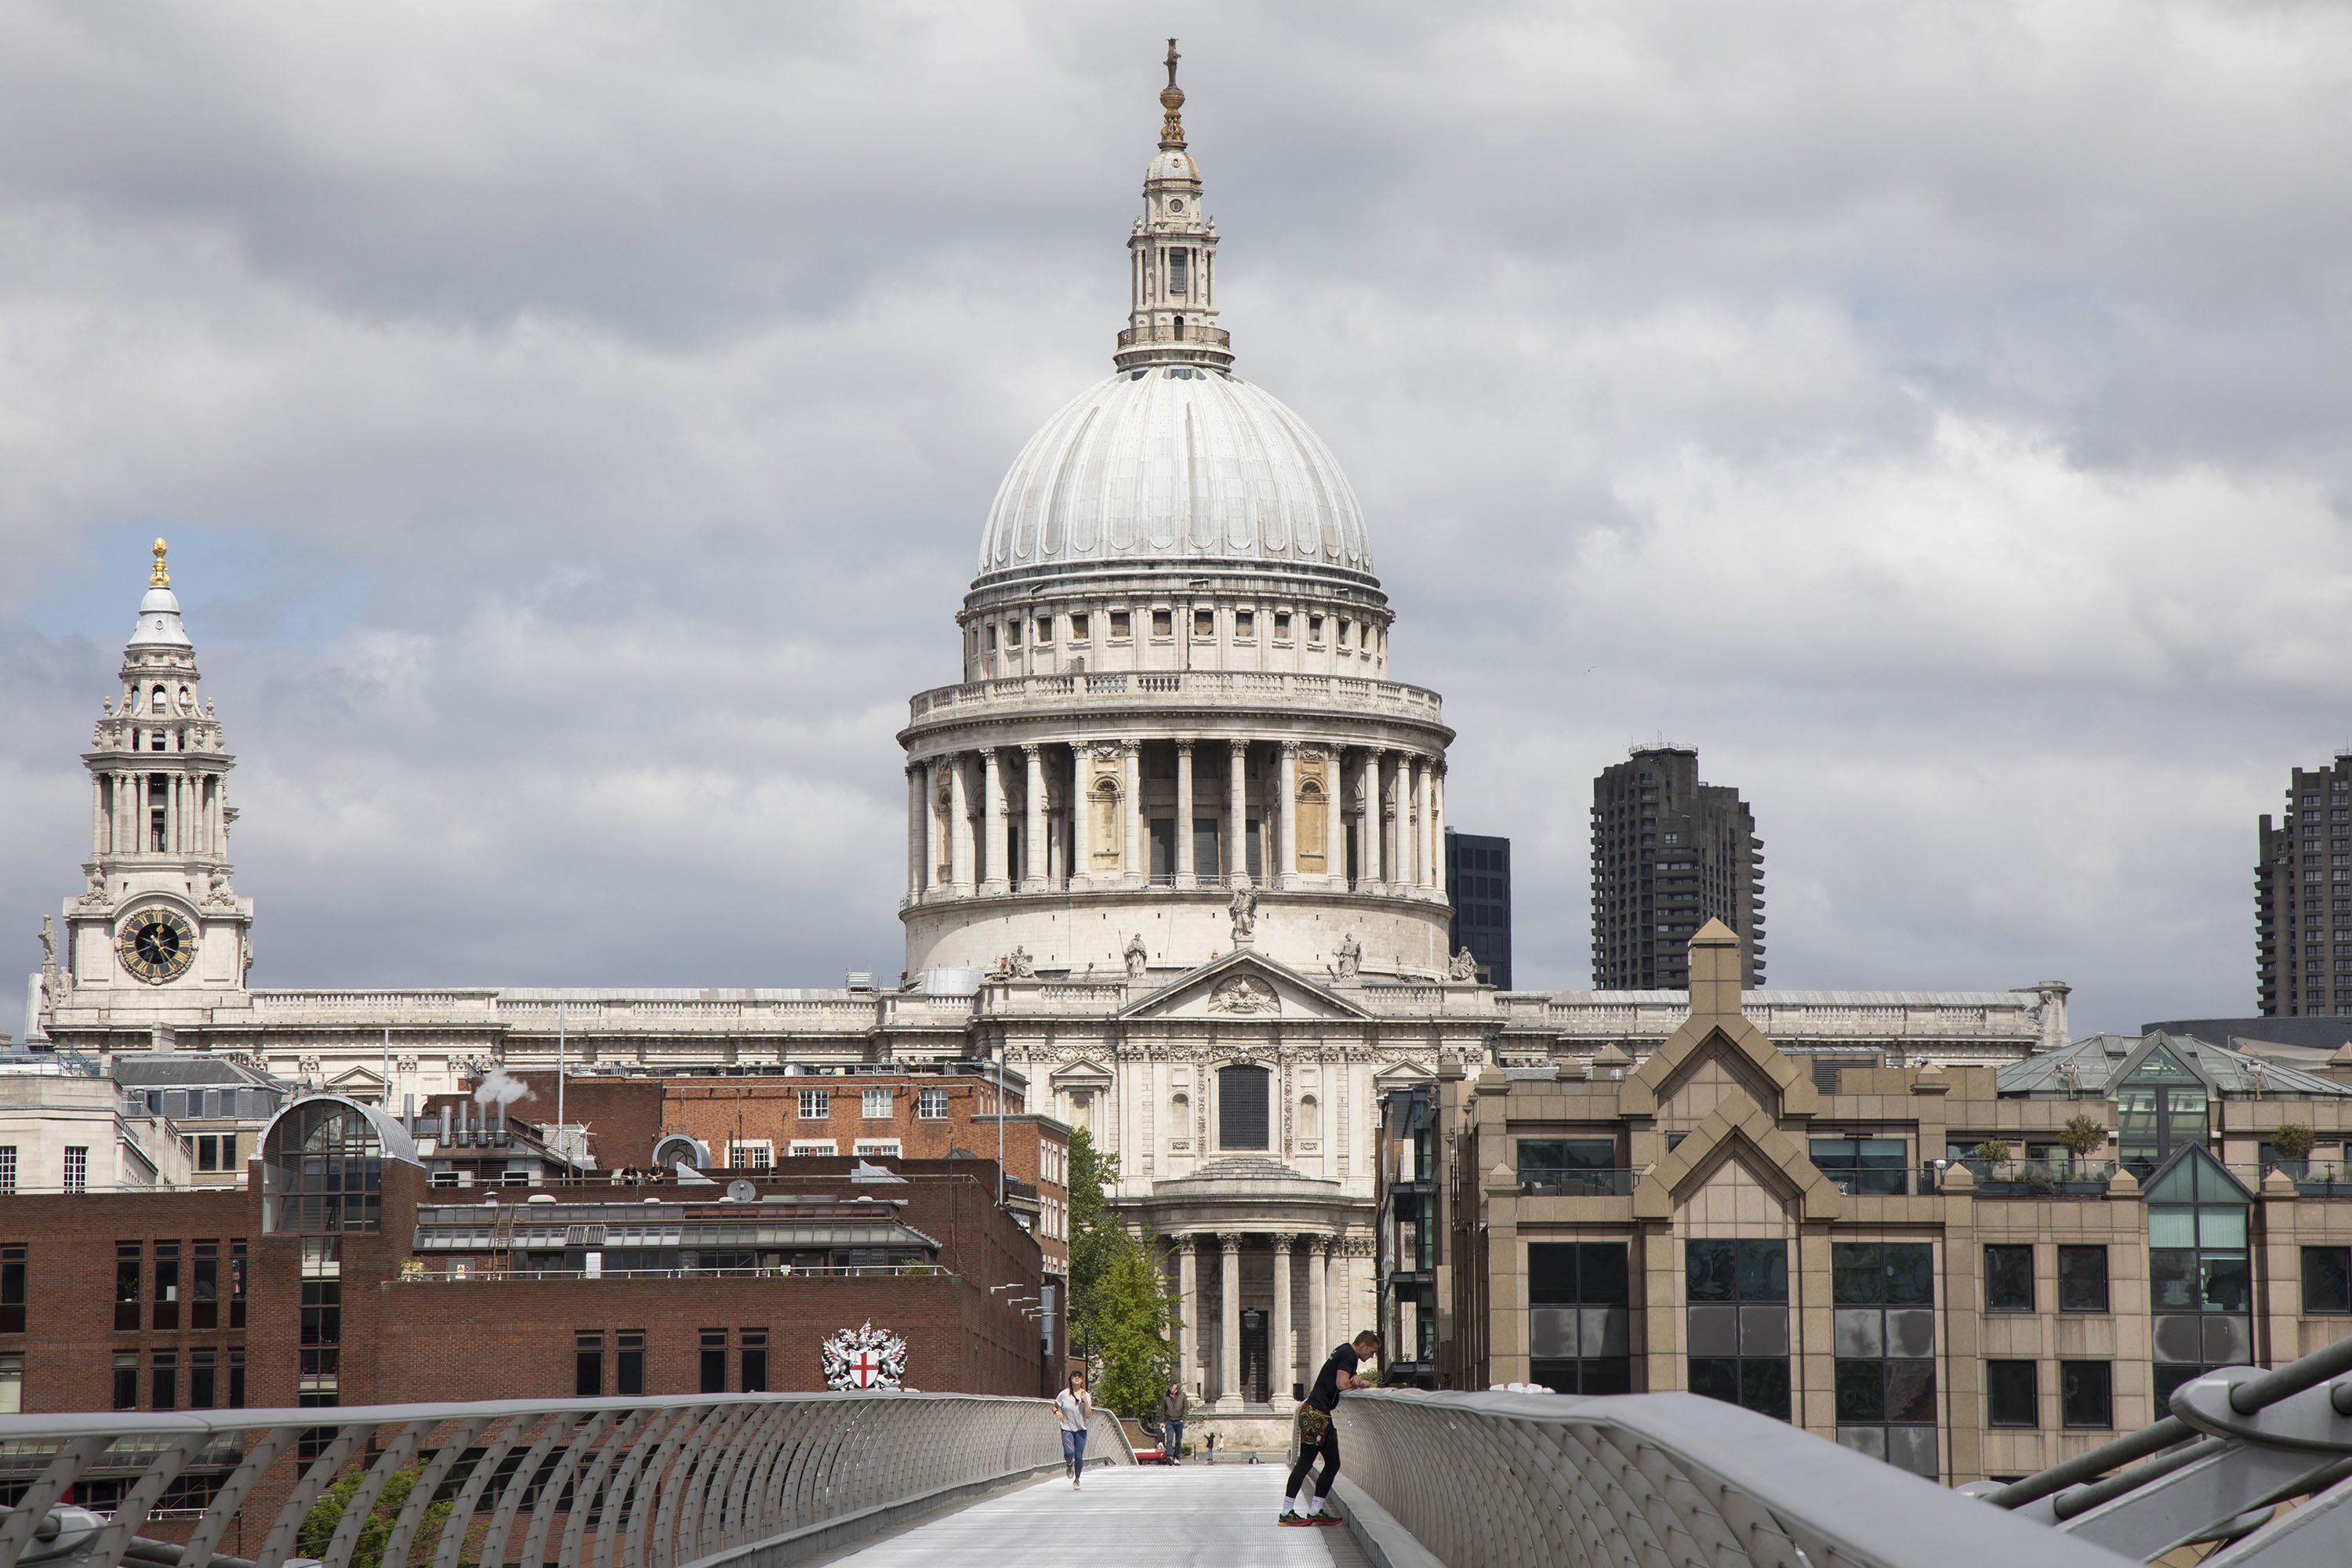 The view looking across the Millennium Bridge towards St. Paul's Cathedral in London on May 11. 